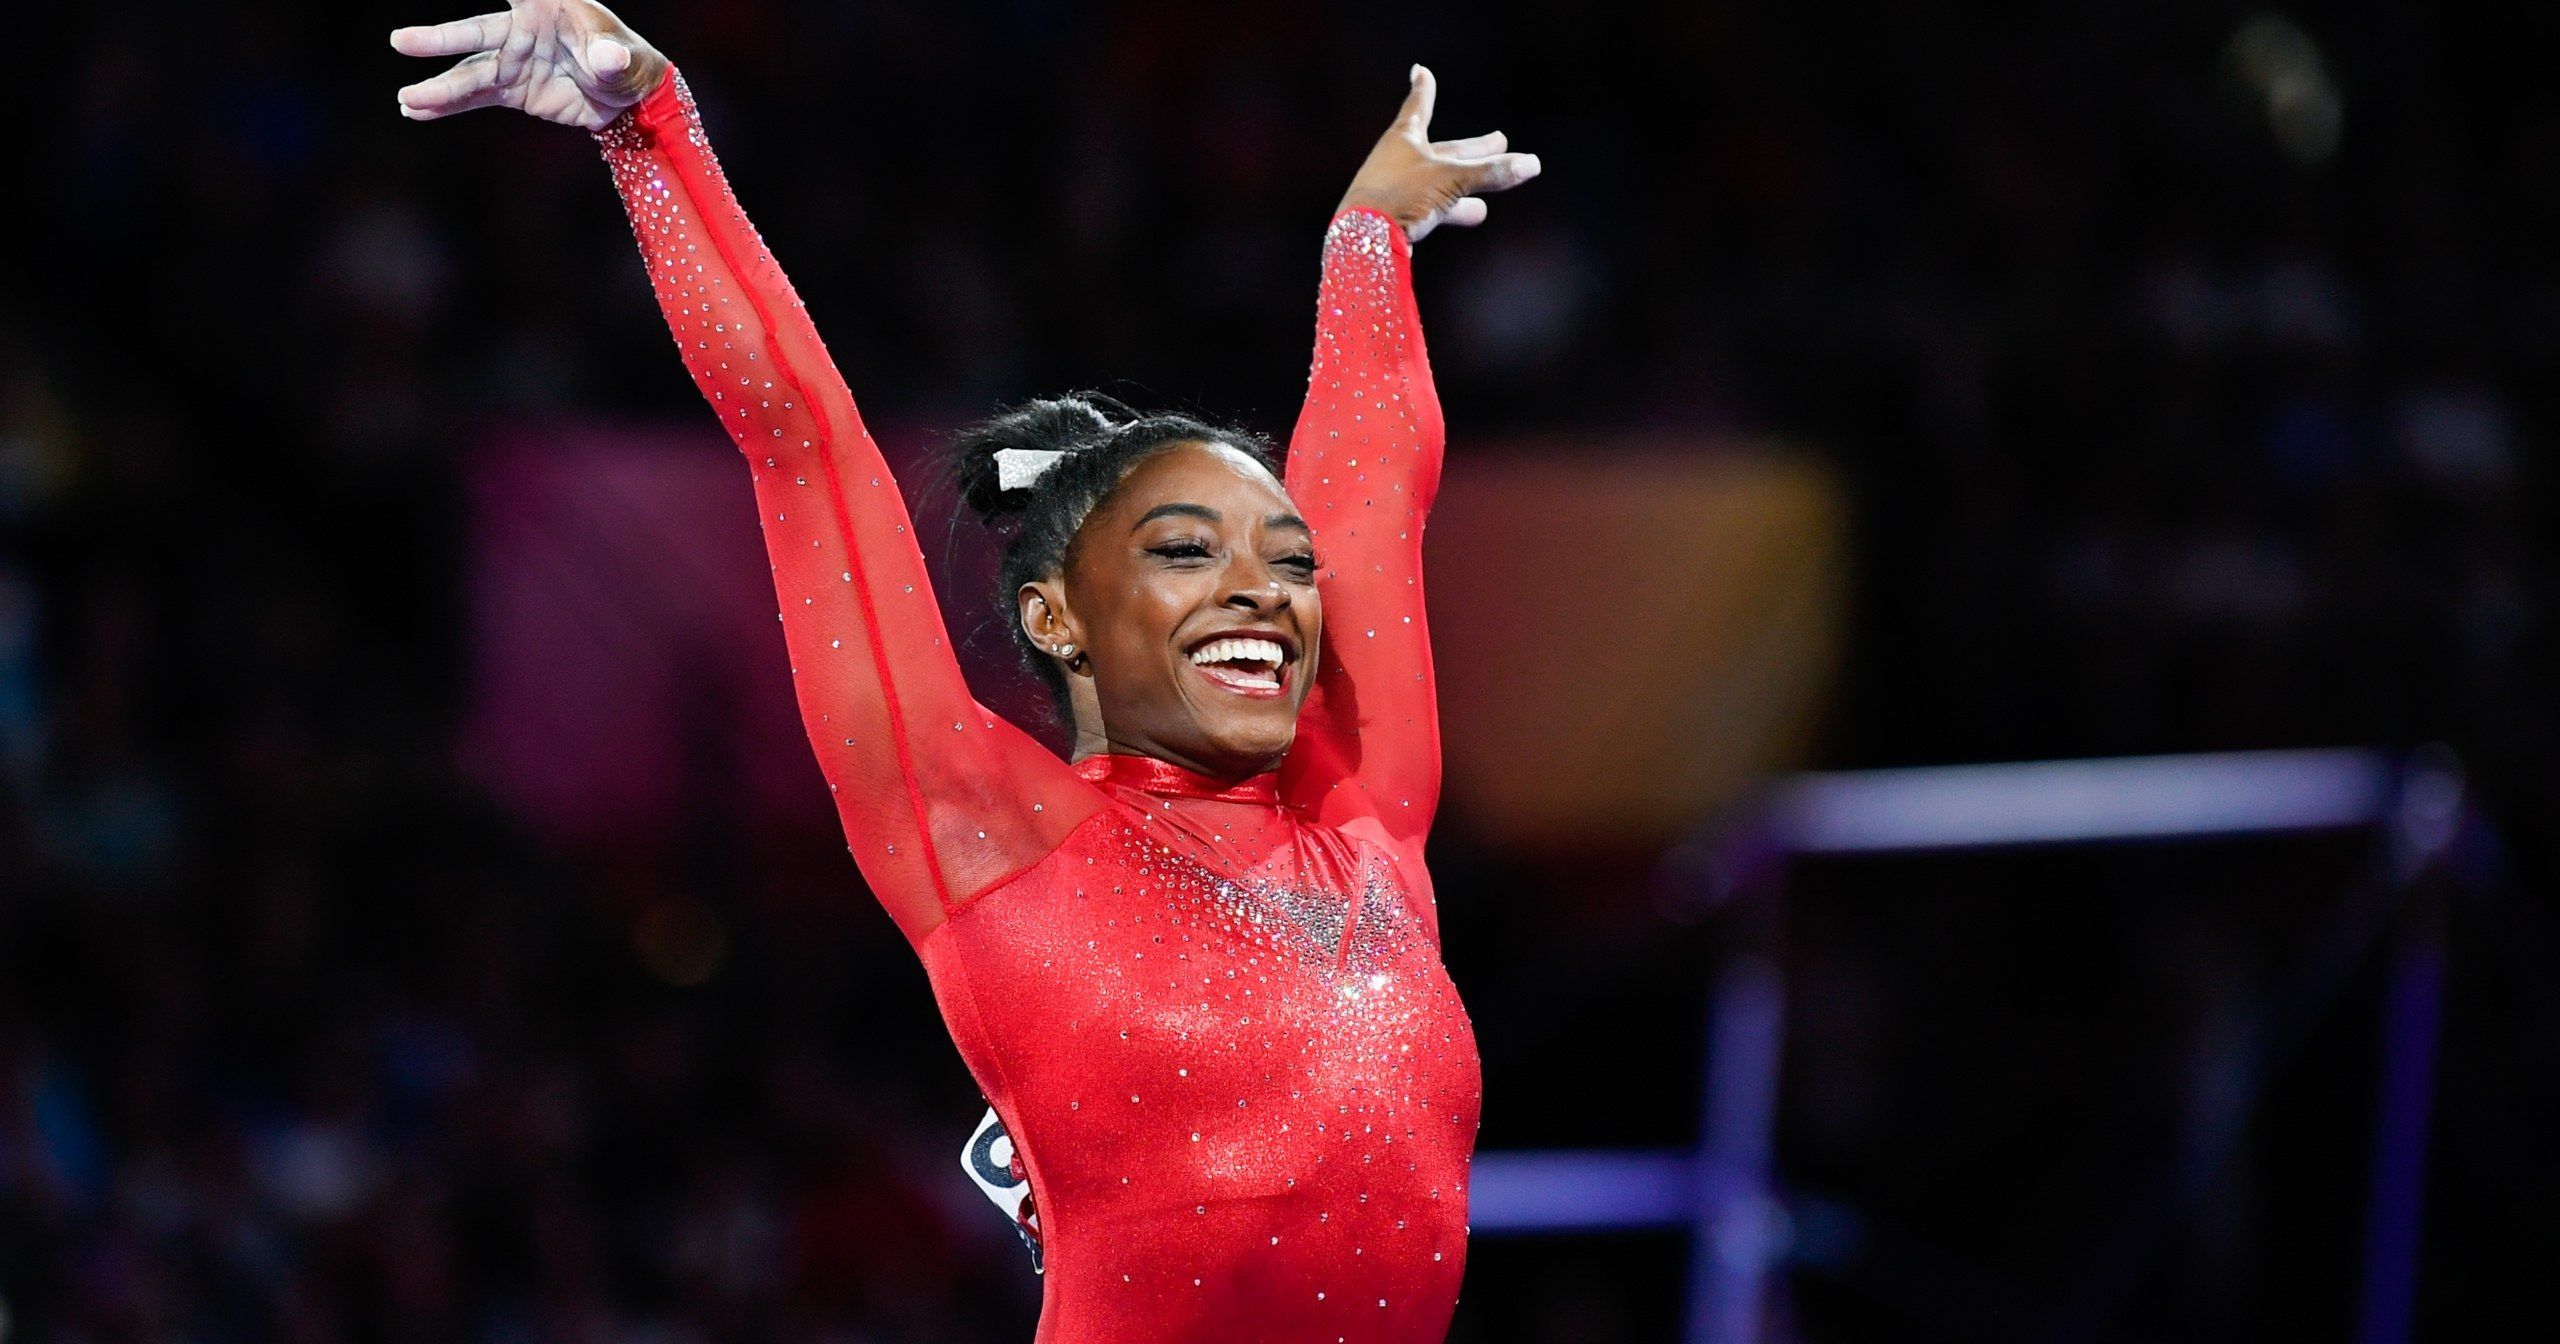 Simone Biles Most Decorated Gymnast In World Championship